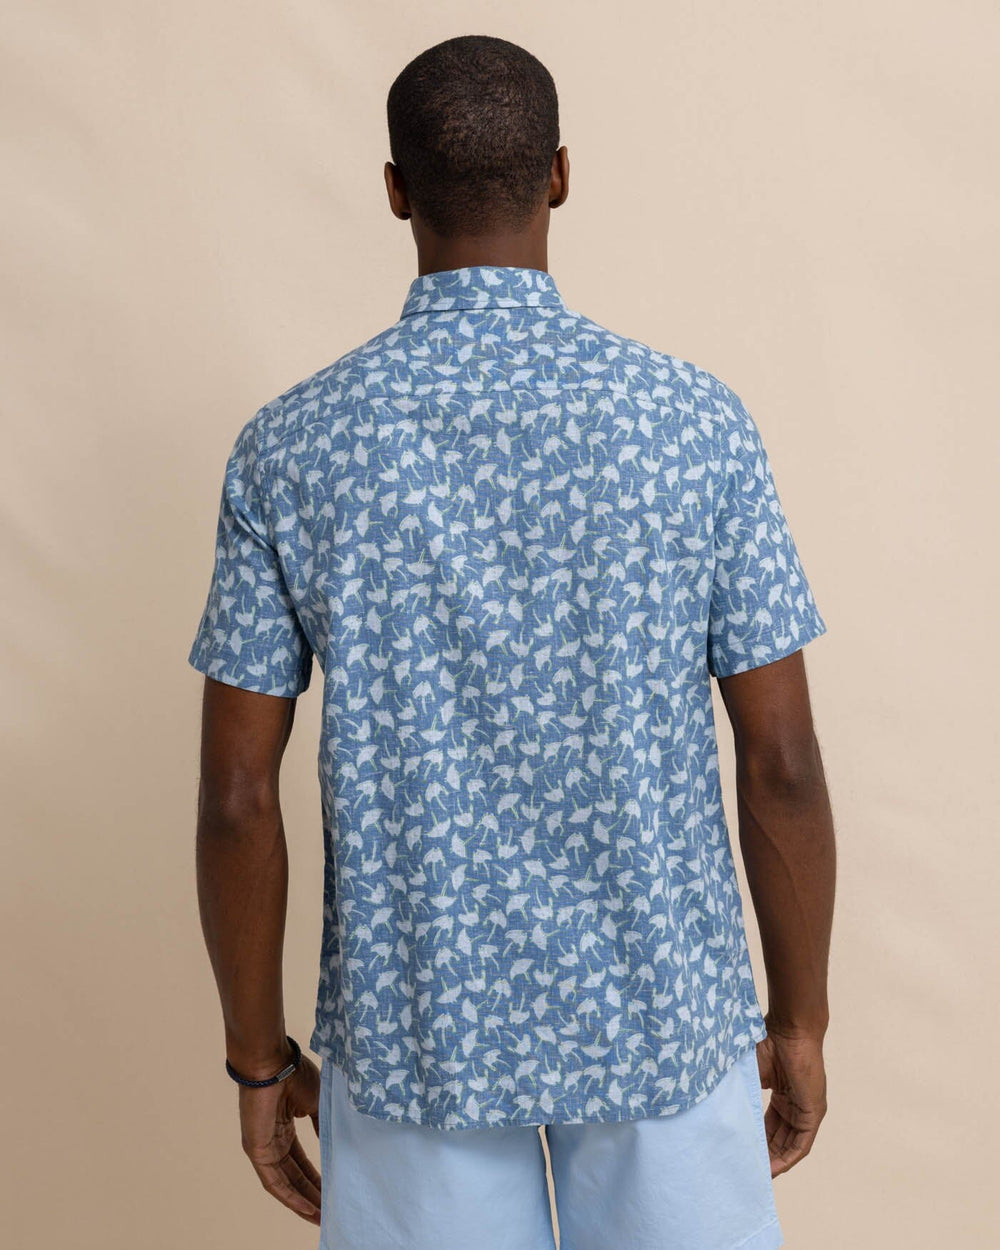 The back view of the Southern Tide Summer Rays Short Sleeve Sport Shirt by Southern Tide - Coronet Blue